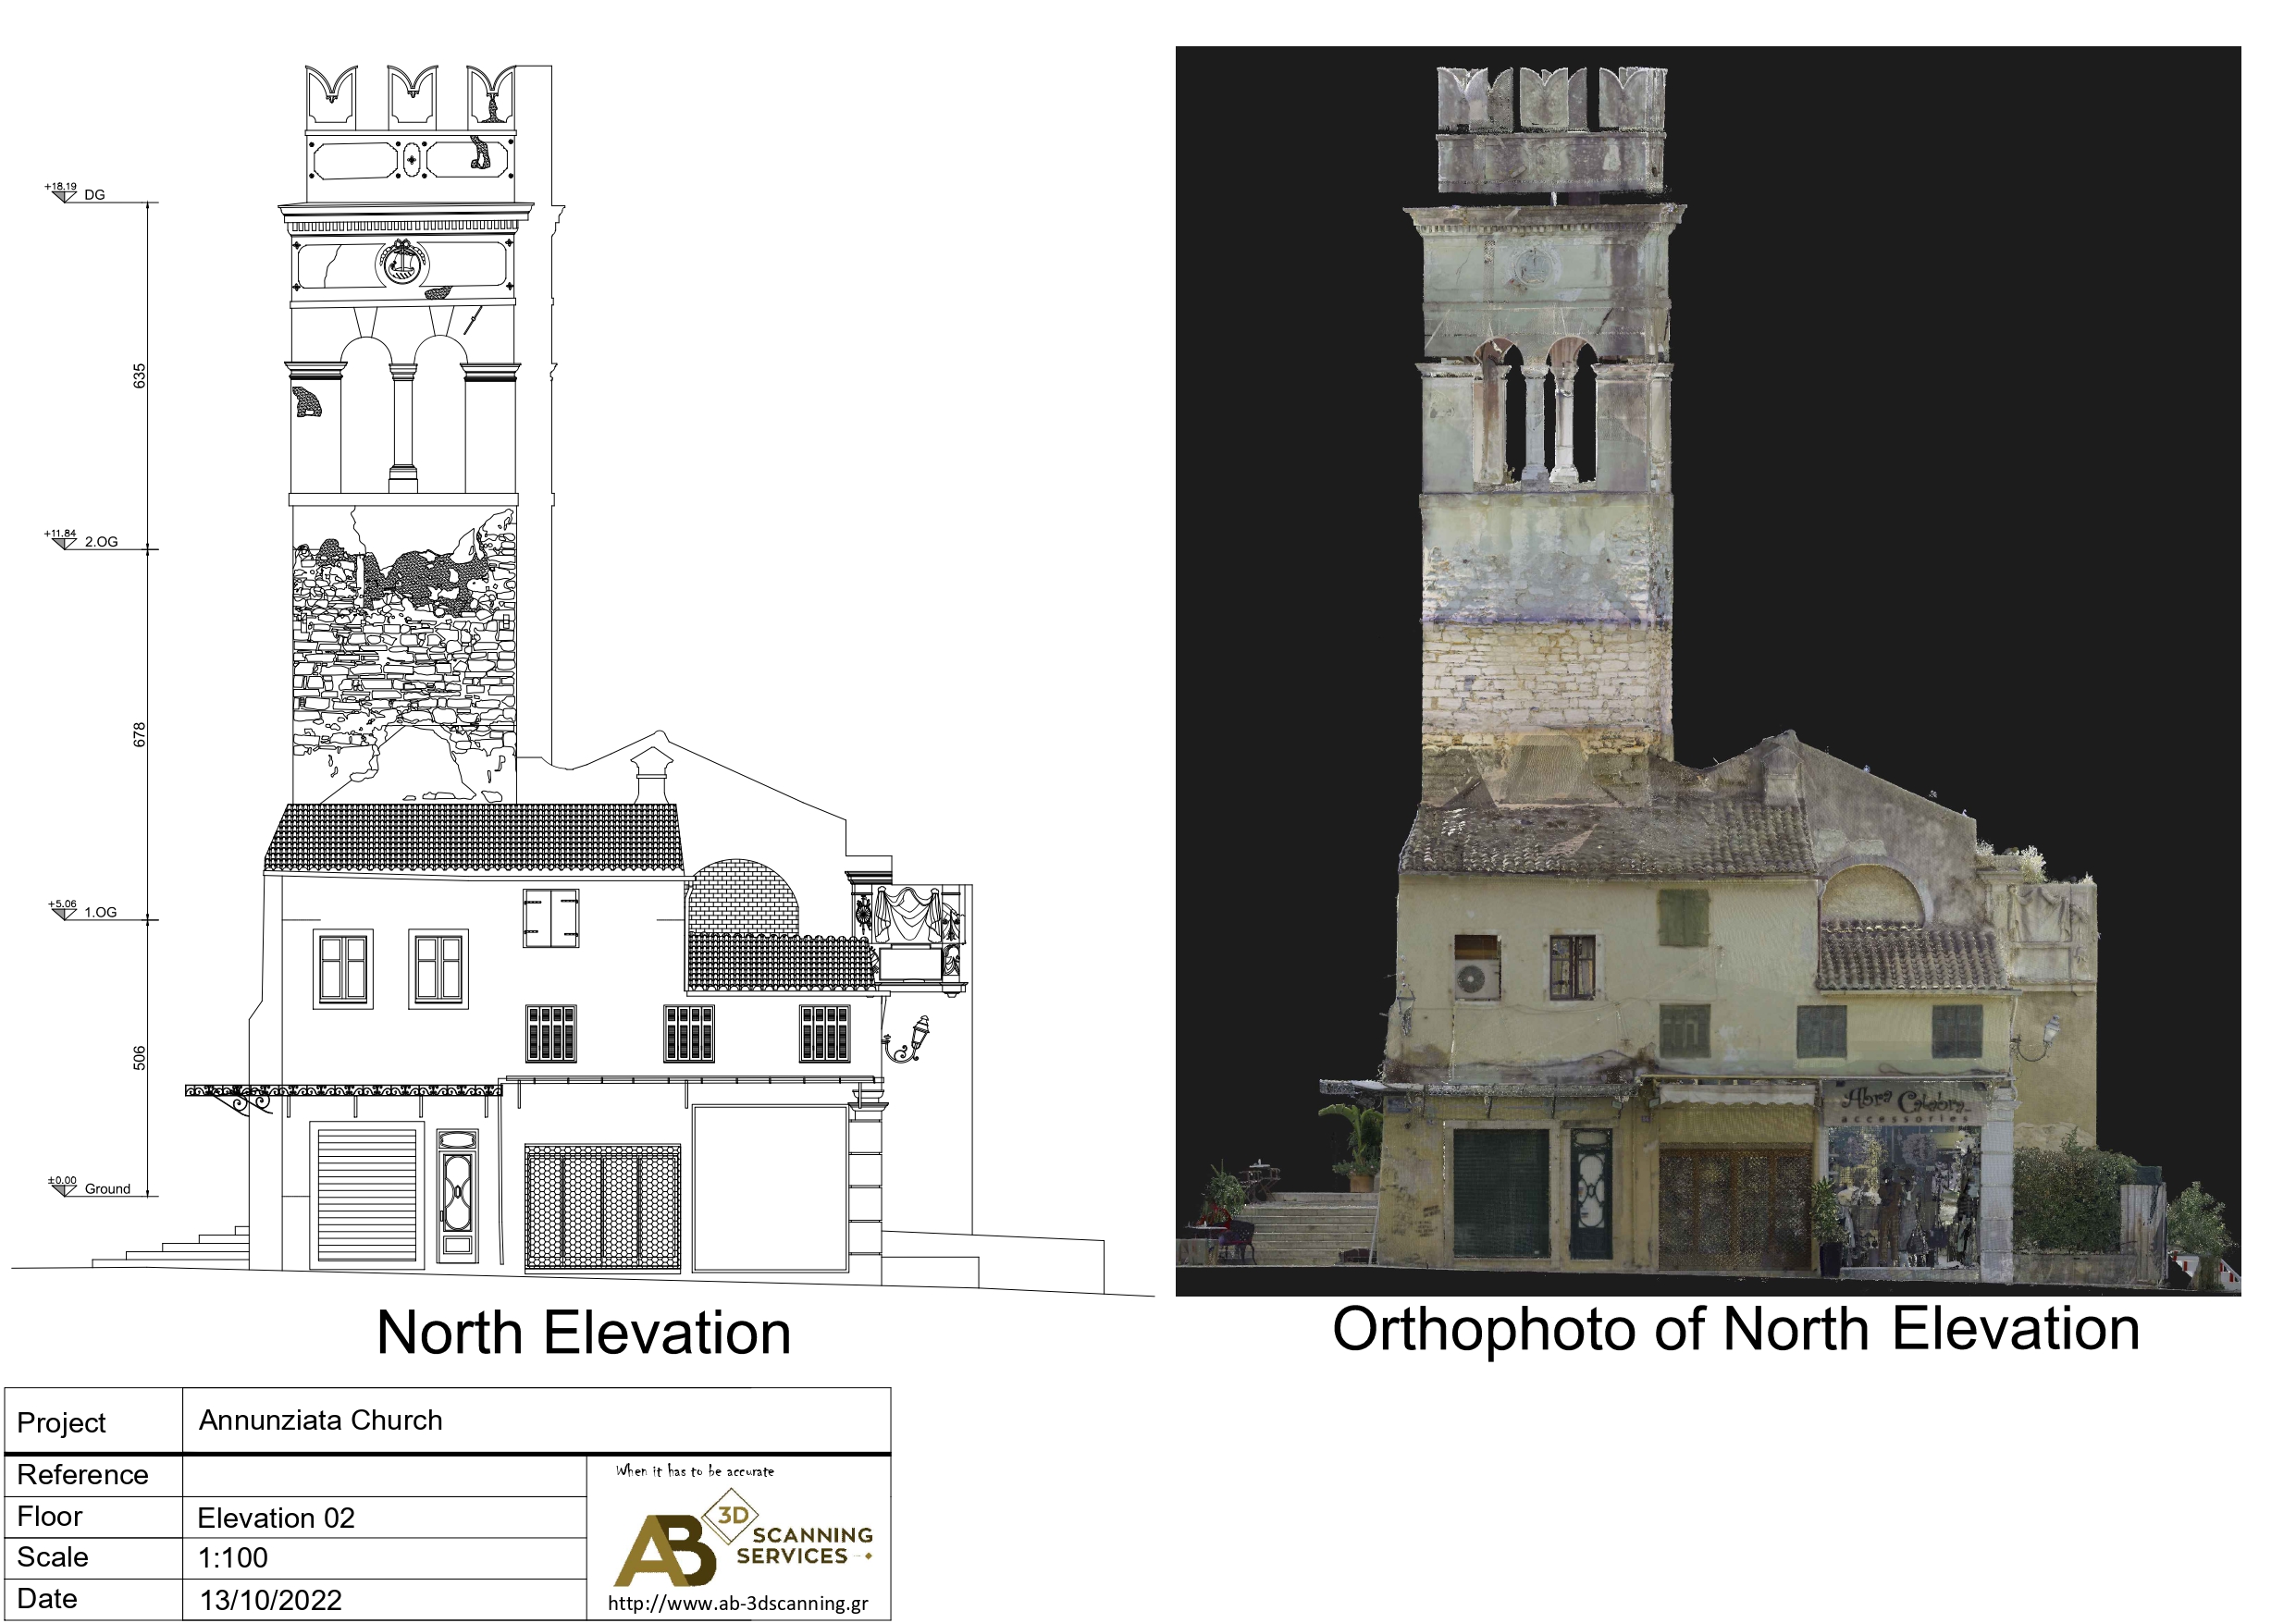 3D Scanning and CAD plans of an historical church